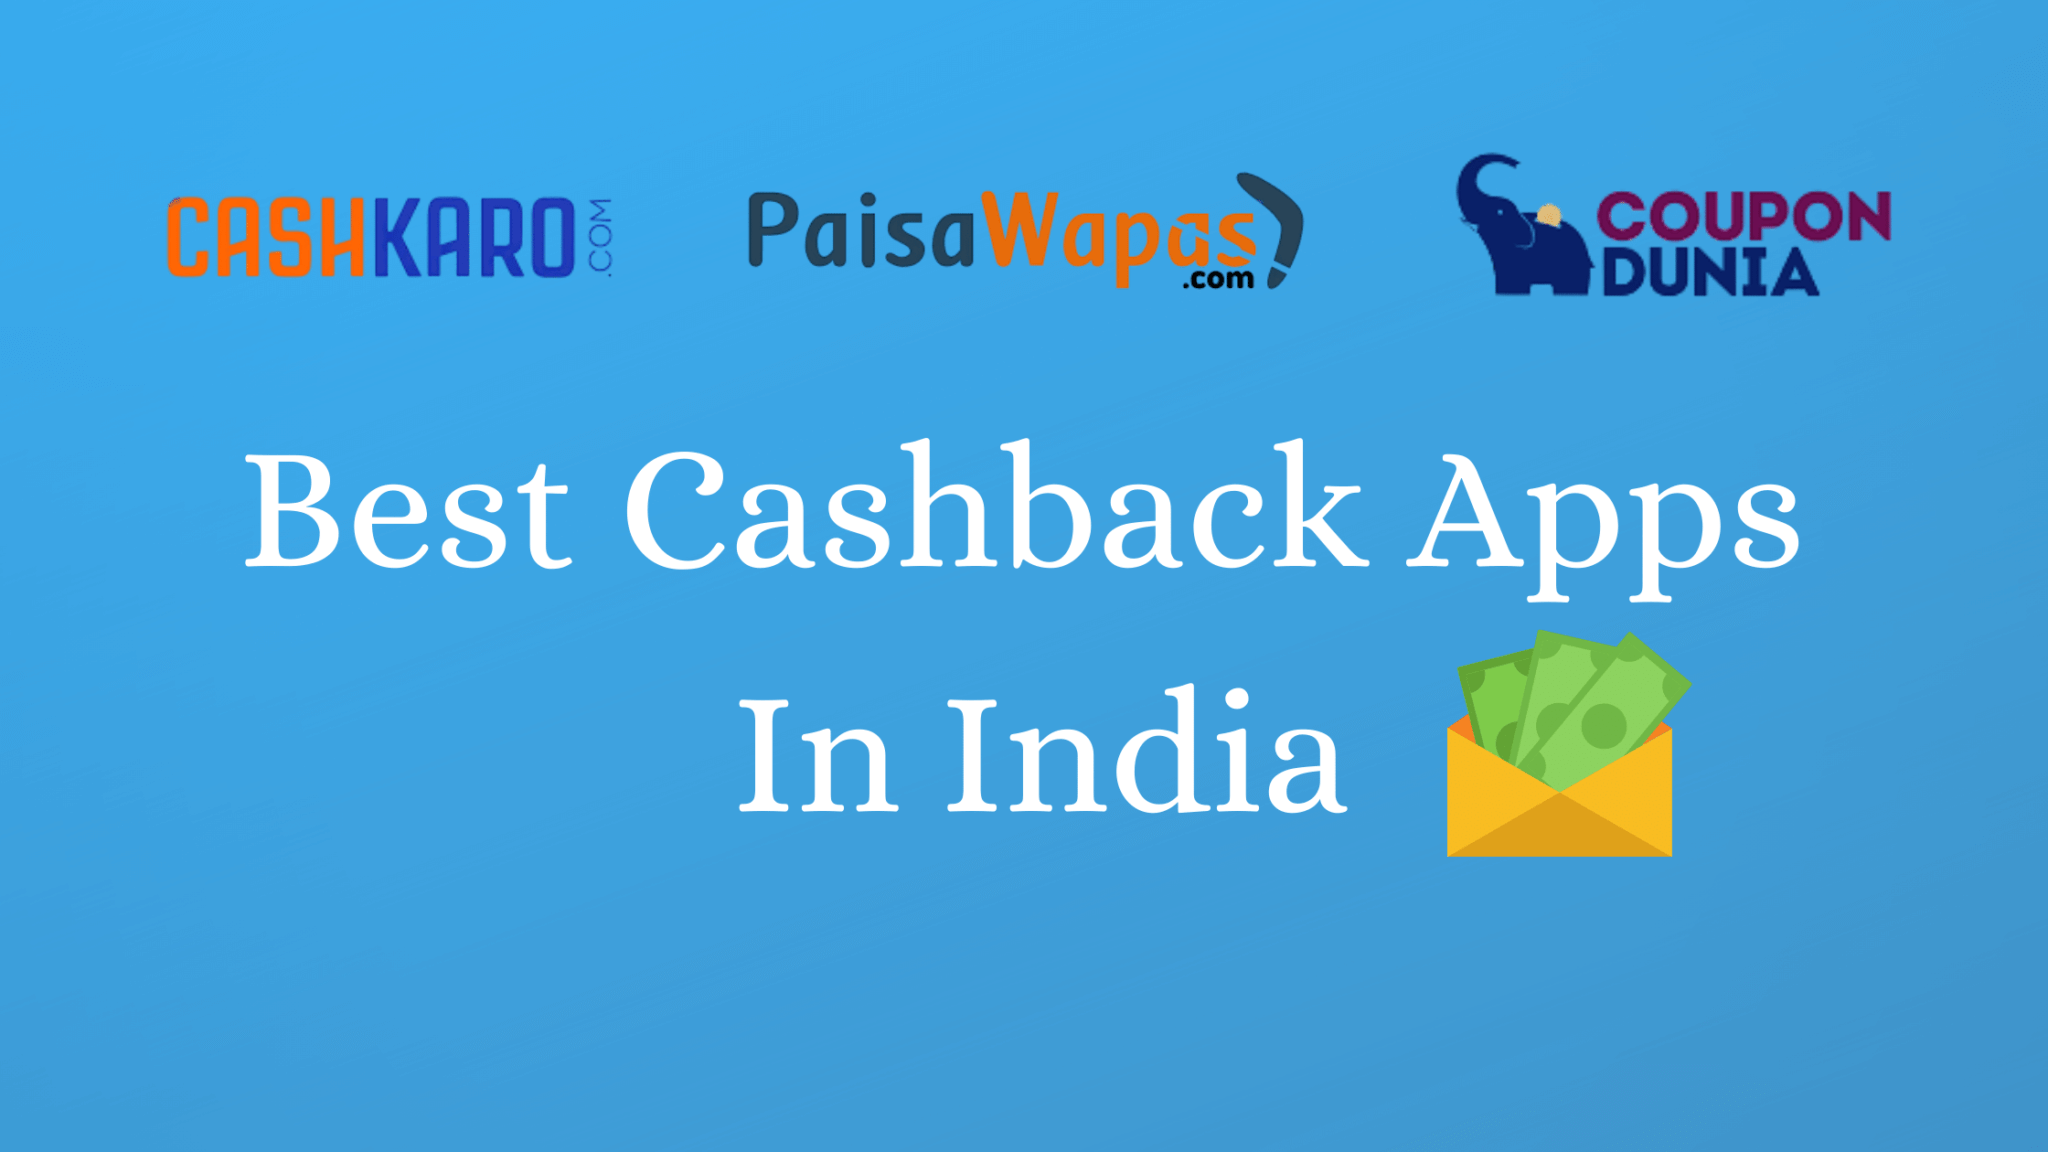 6-best-cashback-apps-in-india-you-should-know-2022